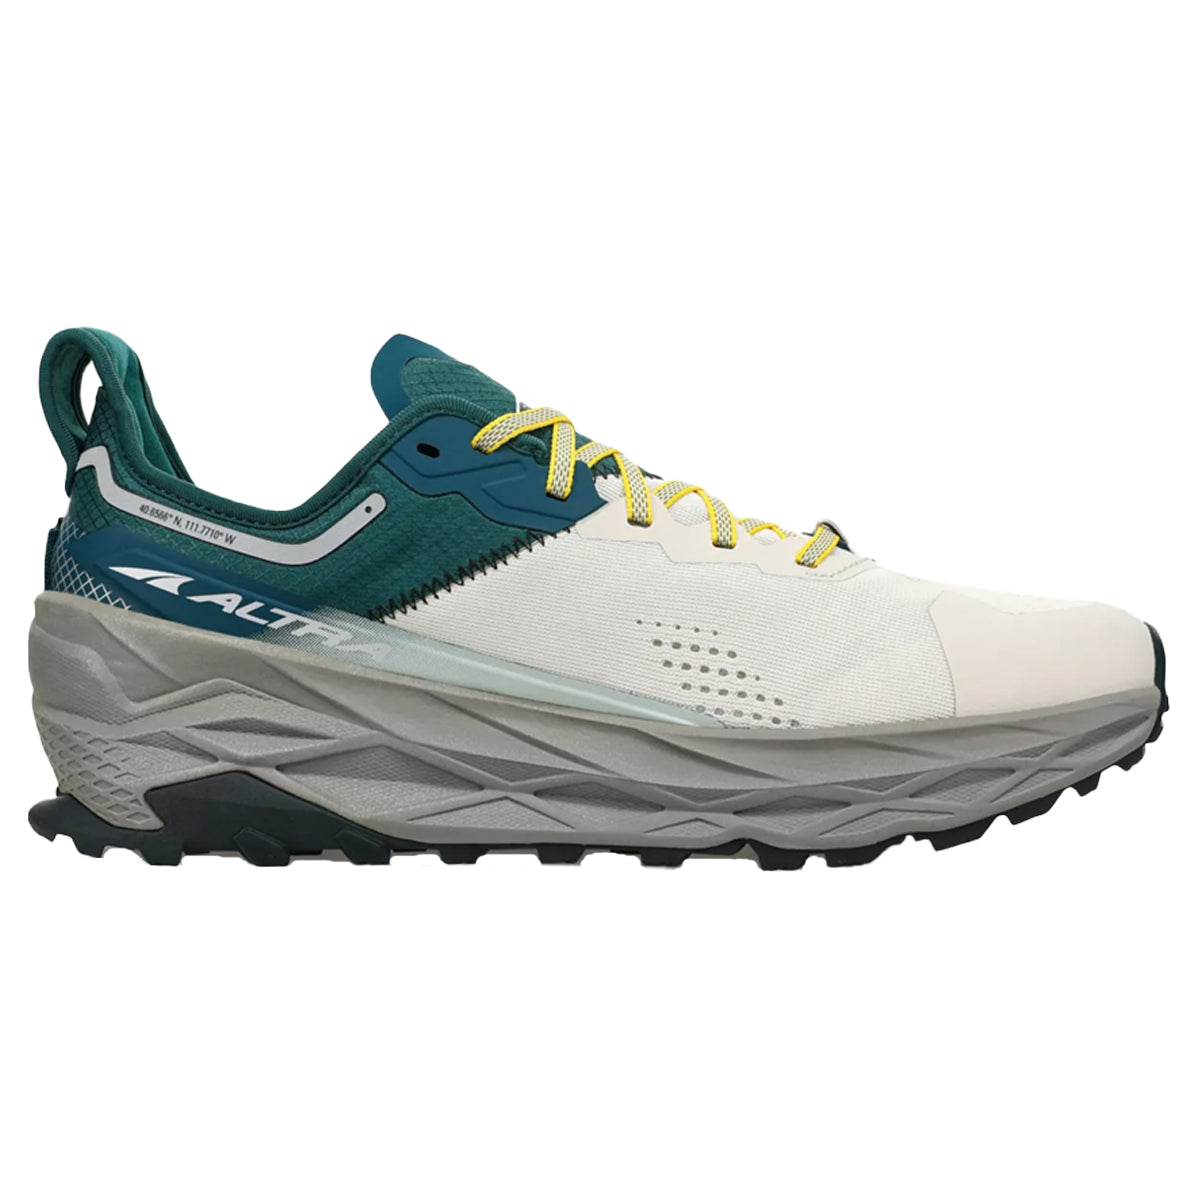 Altra Olympus 5 in Gray & Teal by GOHUNT | Altra - GOHUNT Shop